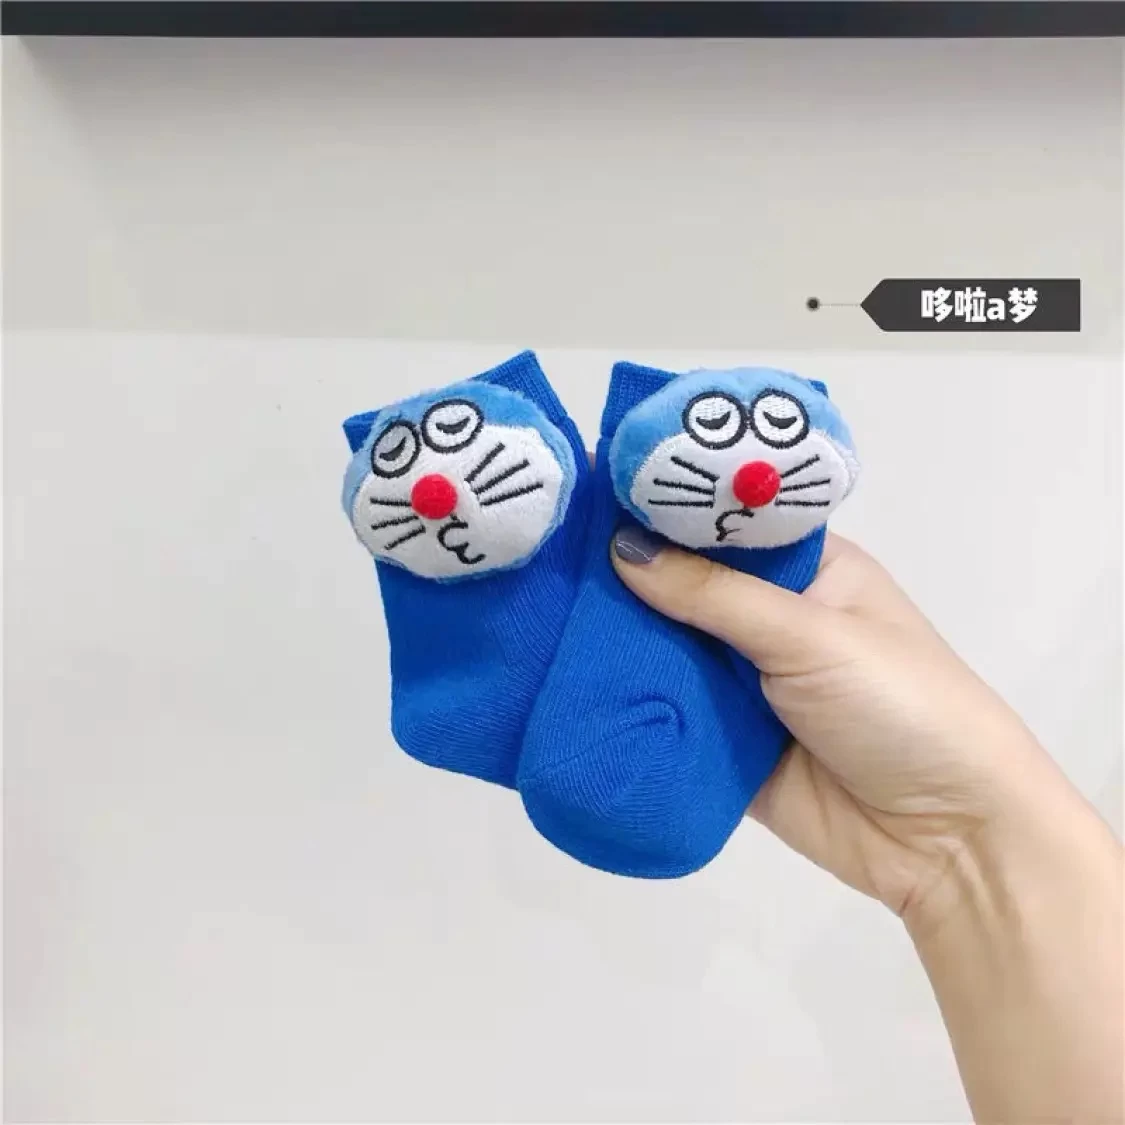 Fashionable and characteristic baby socks are deeply loved by babies